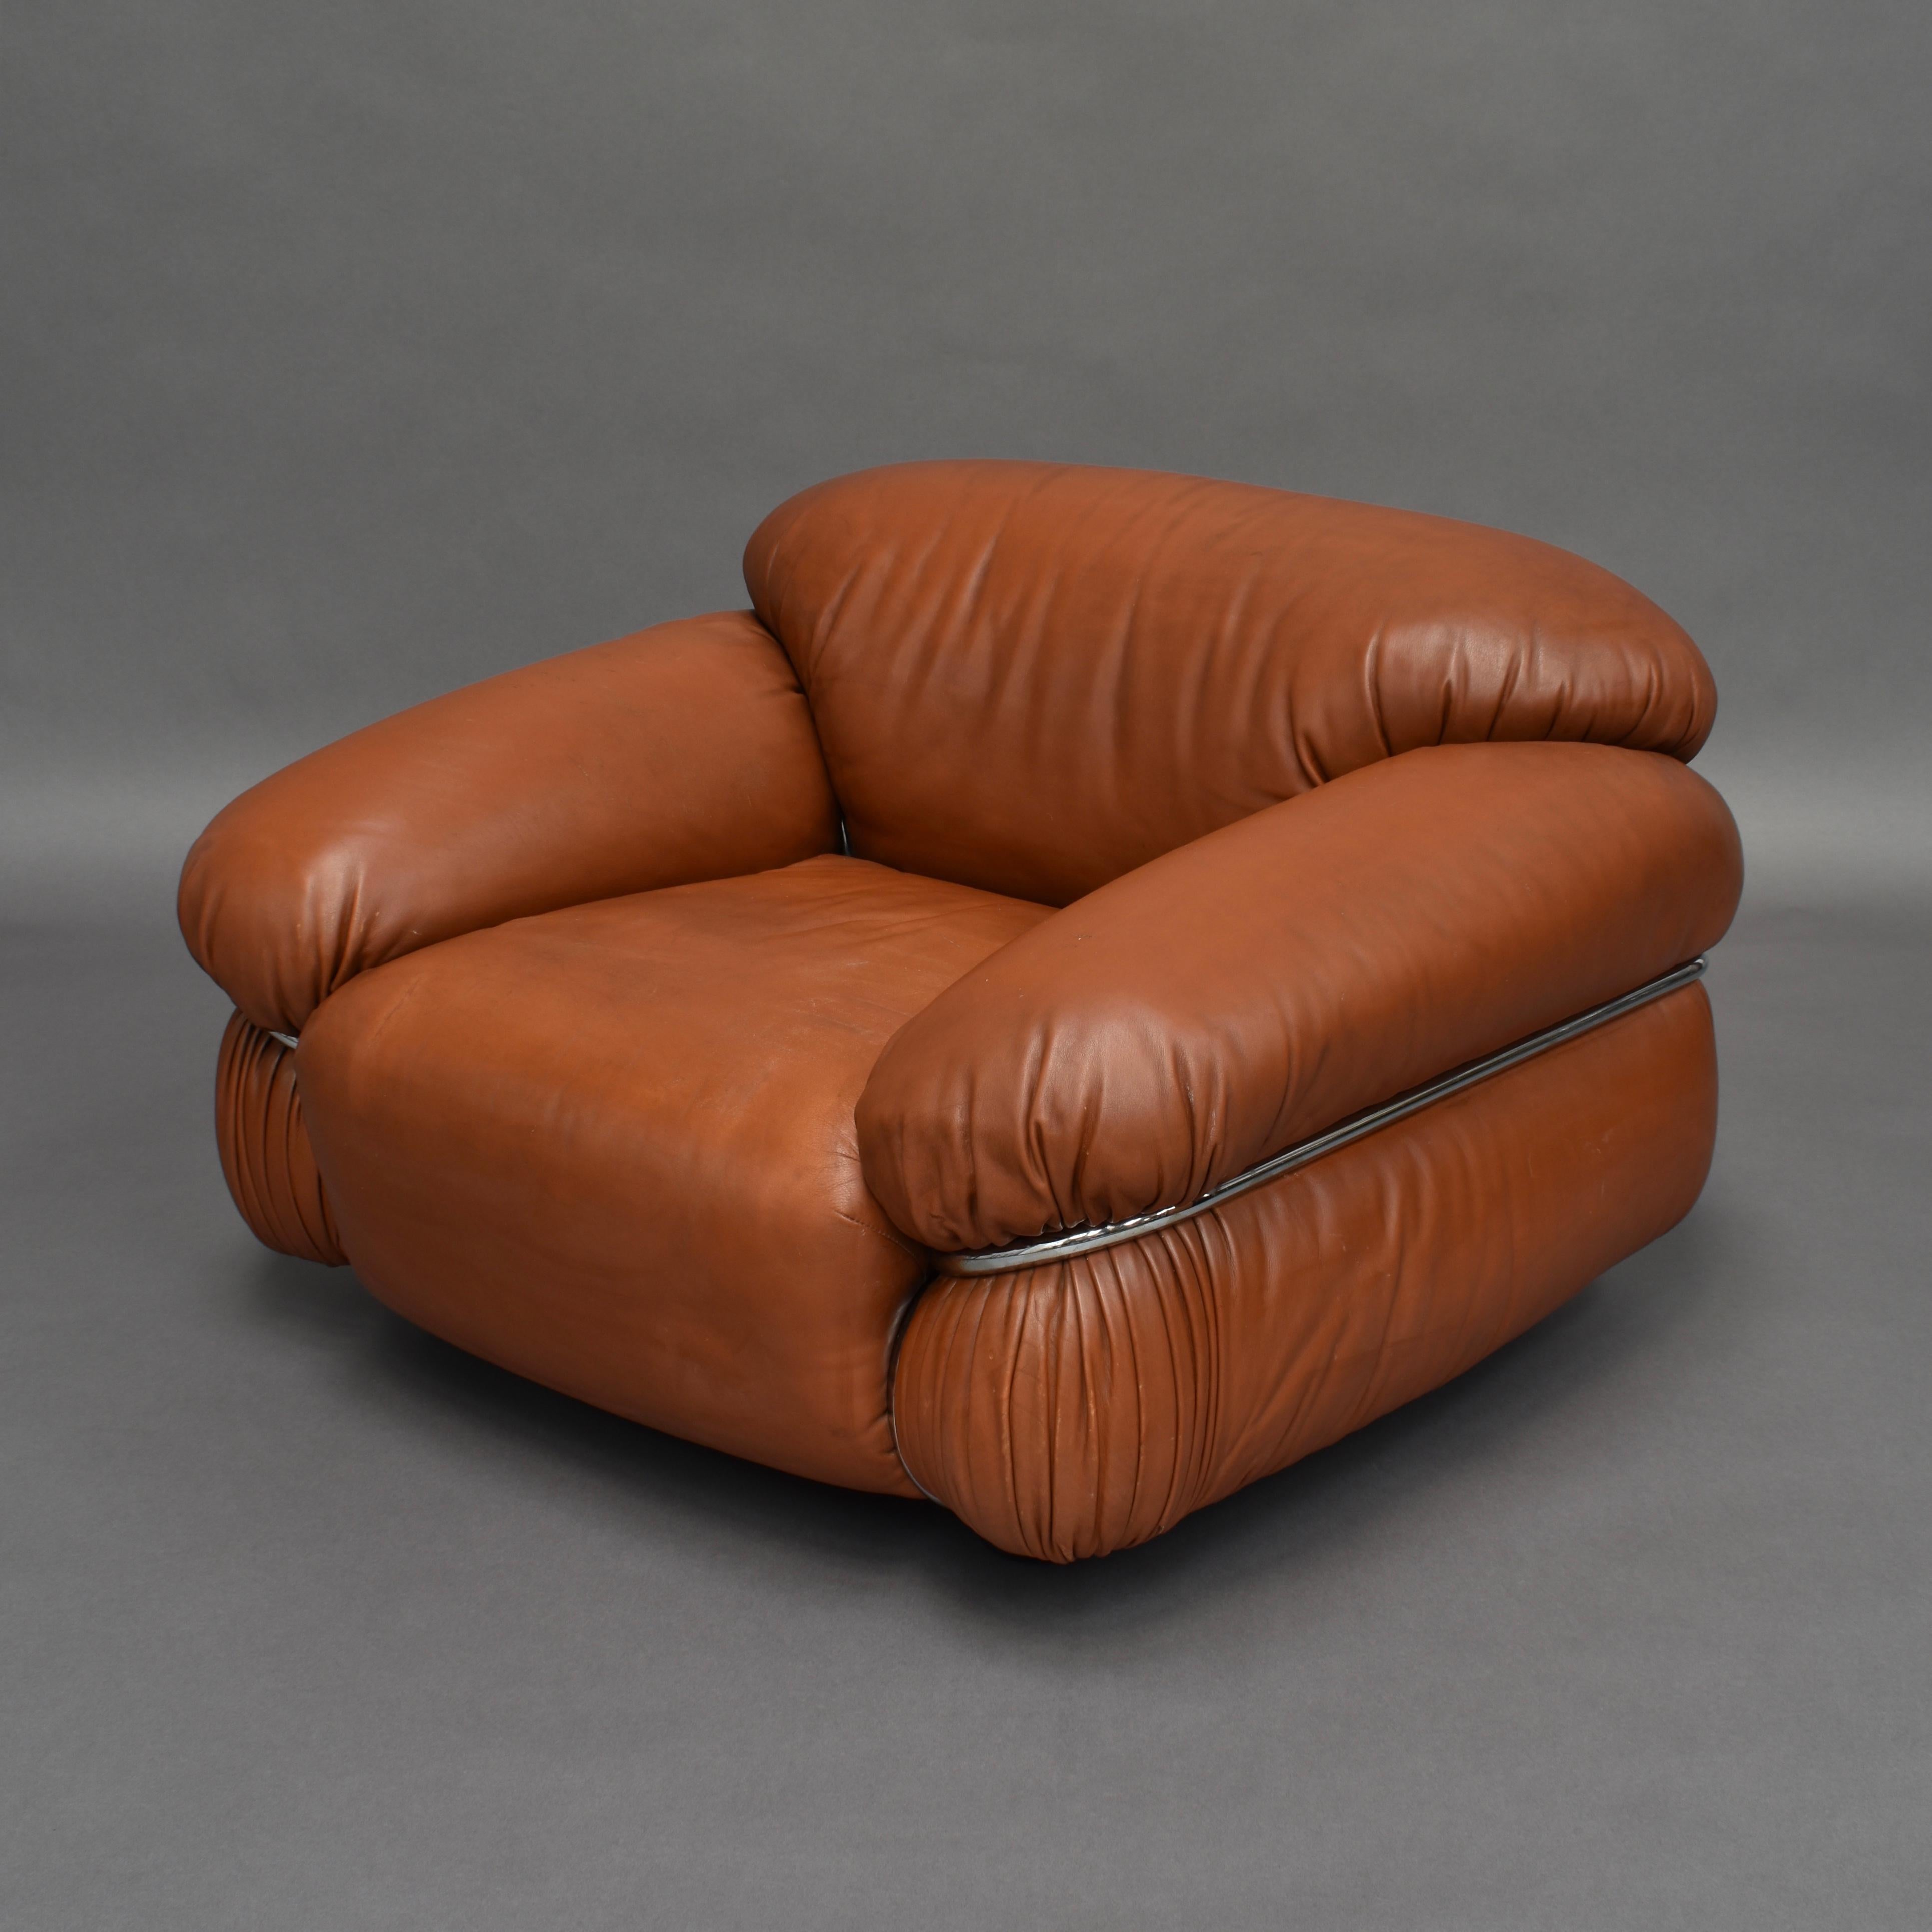 Gorgeous Sesann lounge chair in original cognac leather by Gianfranco Frattini for Cassina, Italy, 1969.

Designer: Gianfranco Frattini

Manufacturer: Cassina

Country: Italy

Model: Sesann chair

Material: Tan Cognac leather /